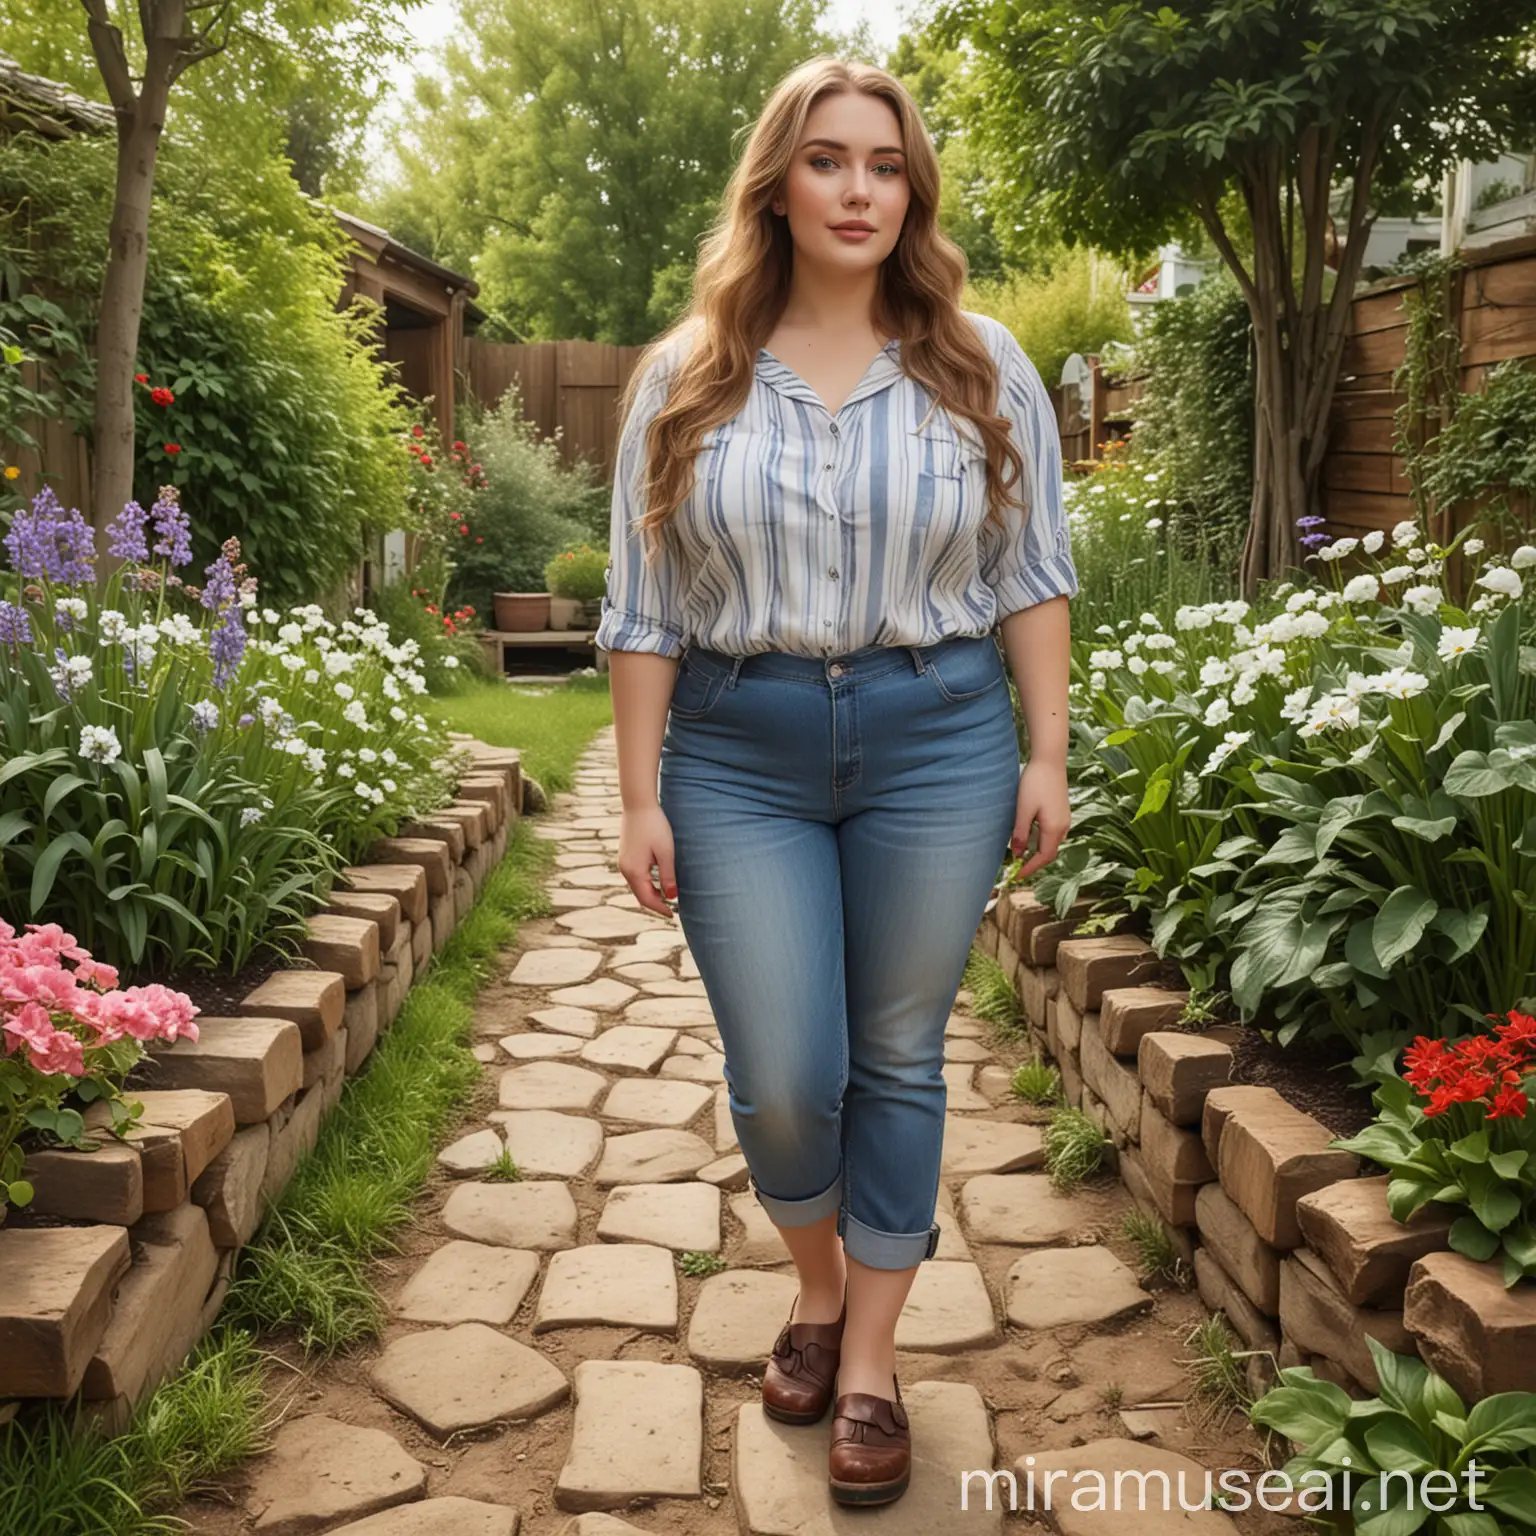 Elegant Plus Size Woman in Garden Attire with Potted Plant